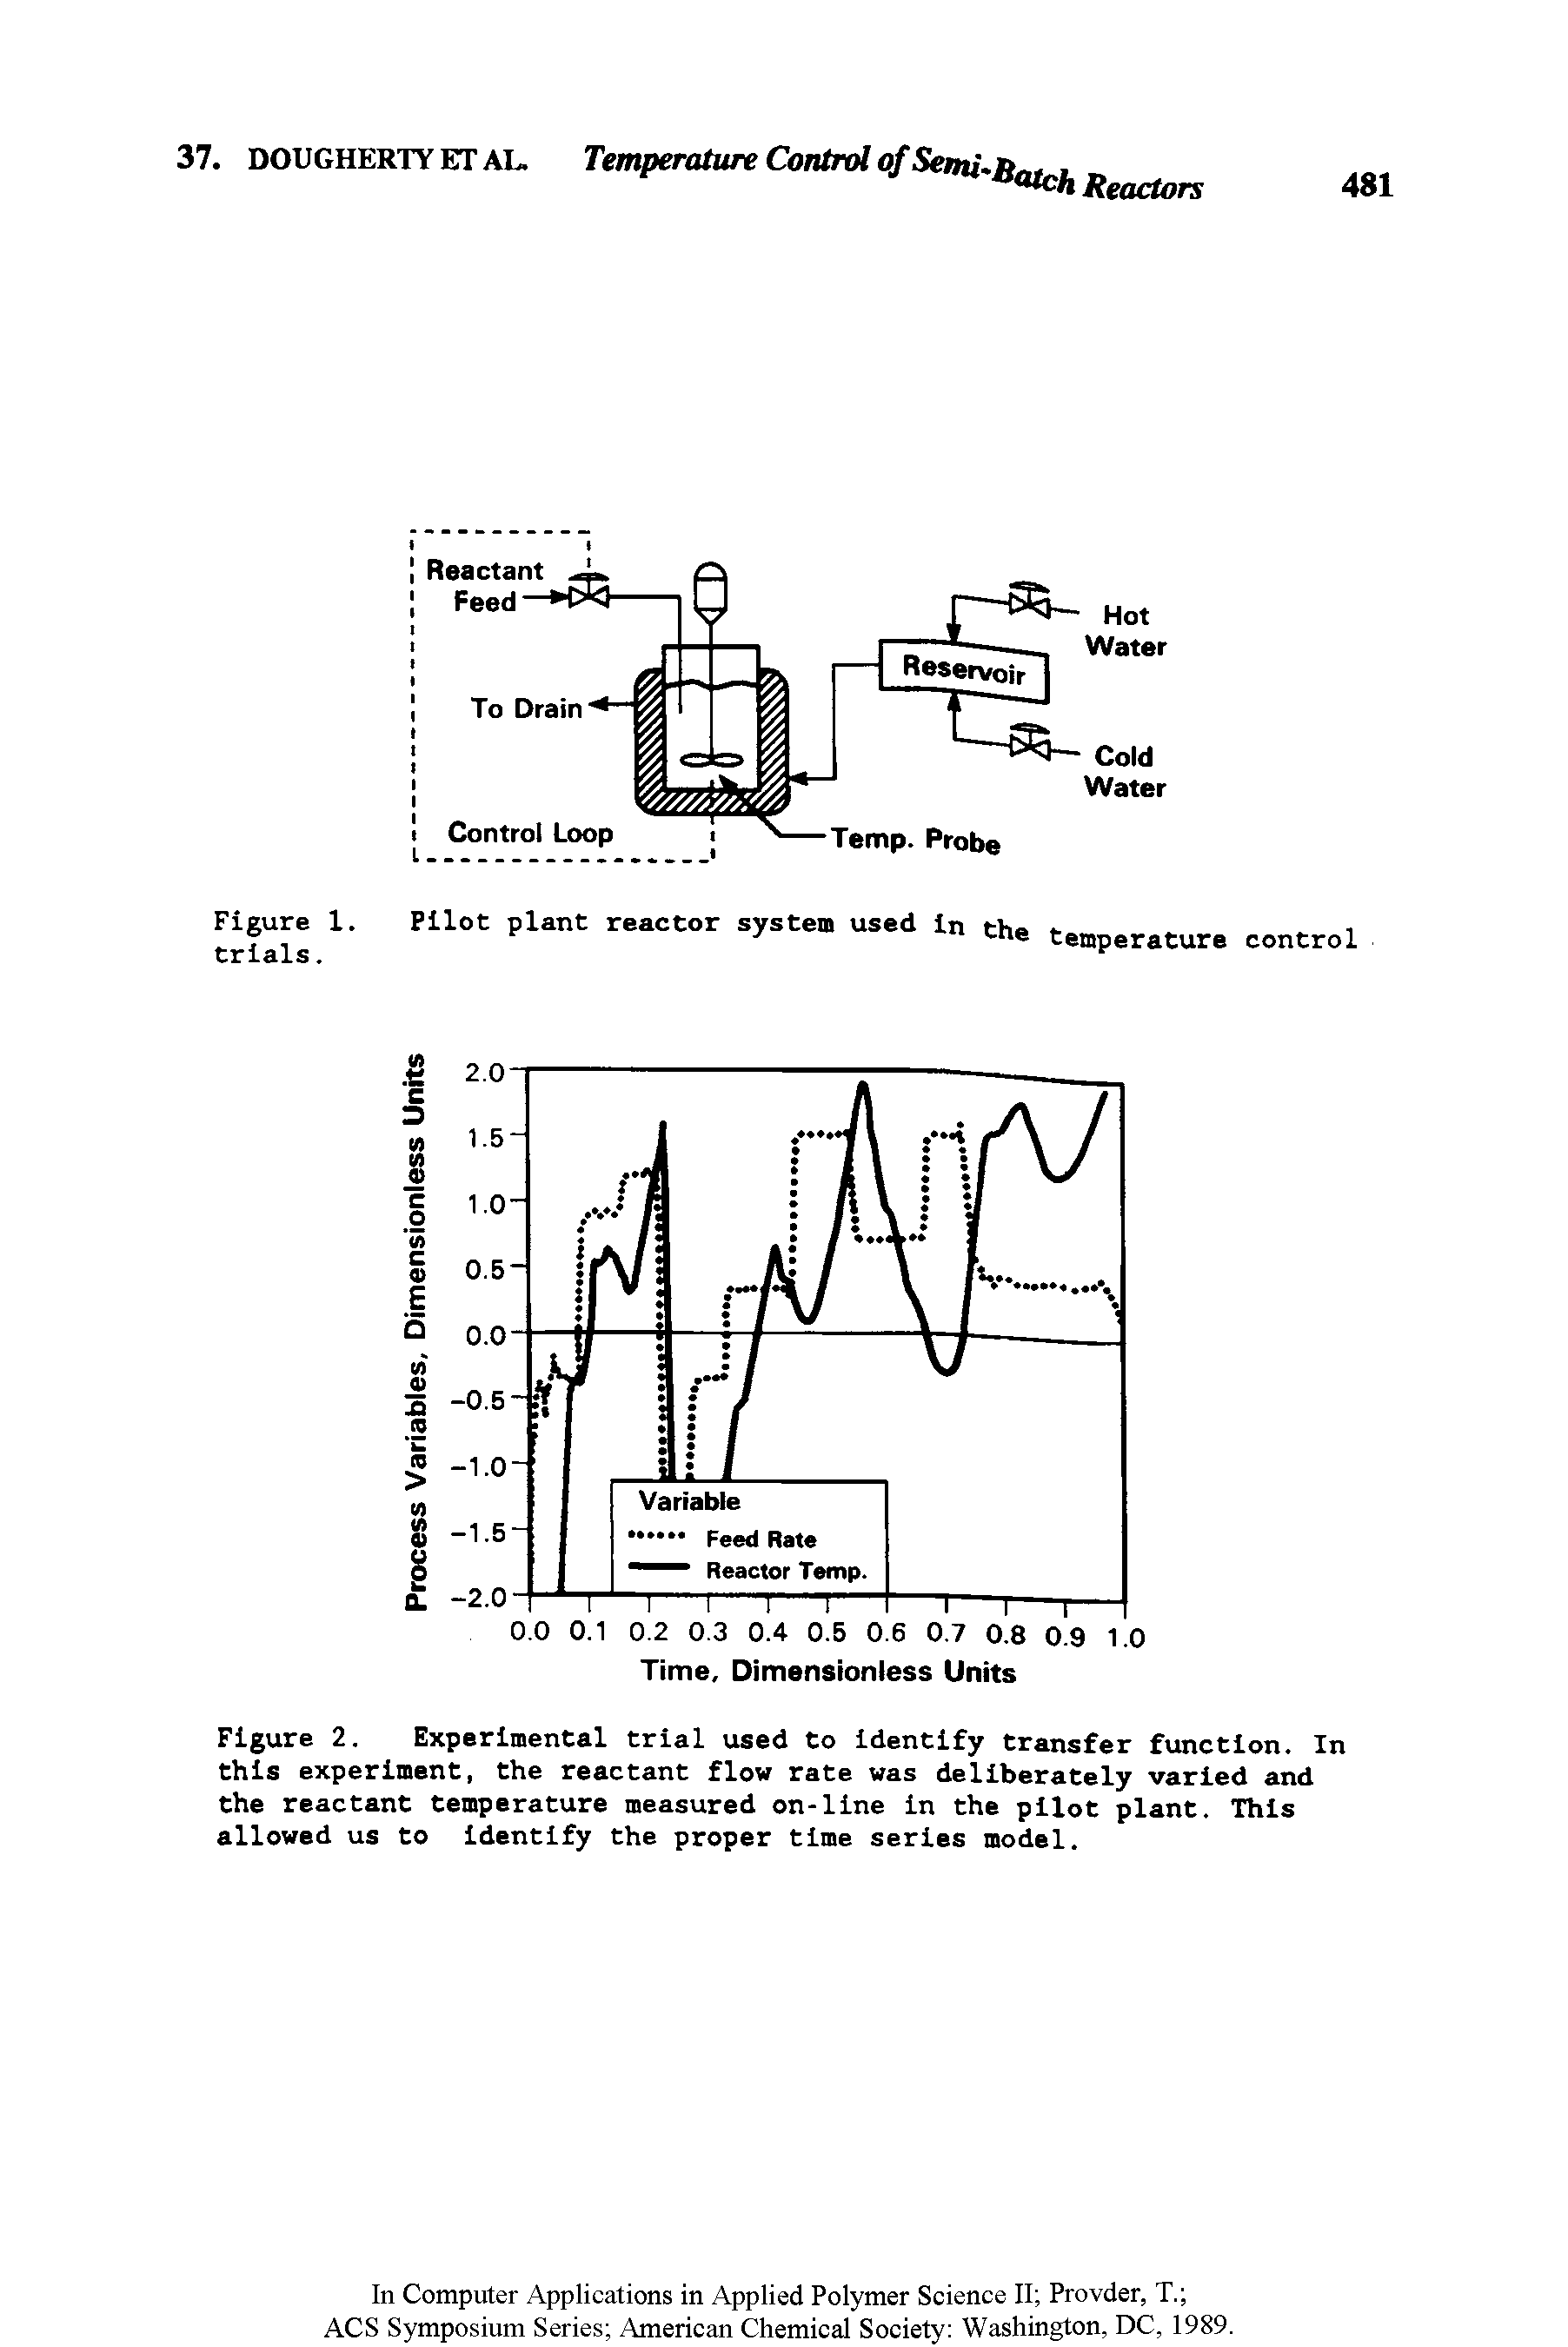 Figure 2. Experimental trial used to Identify transfer function. In this experiment, the reactant flow rate was deliberately varied and the reactant temperature measured on-line in the pilot plant. This allowed us to identify the proper time series model.